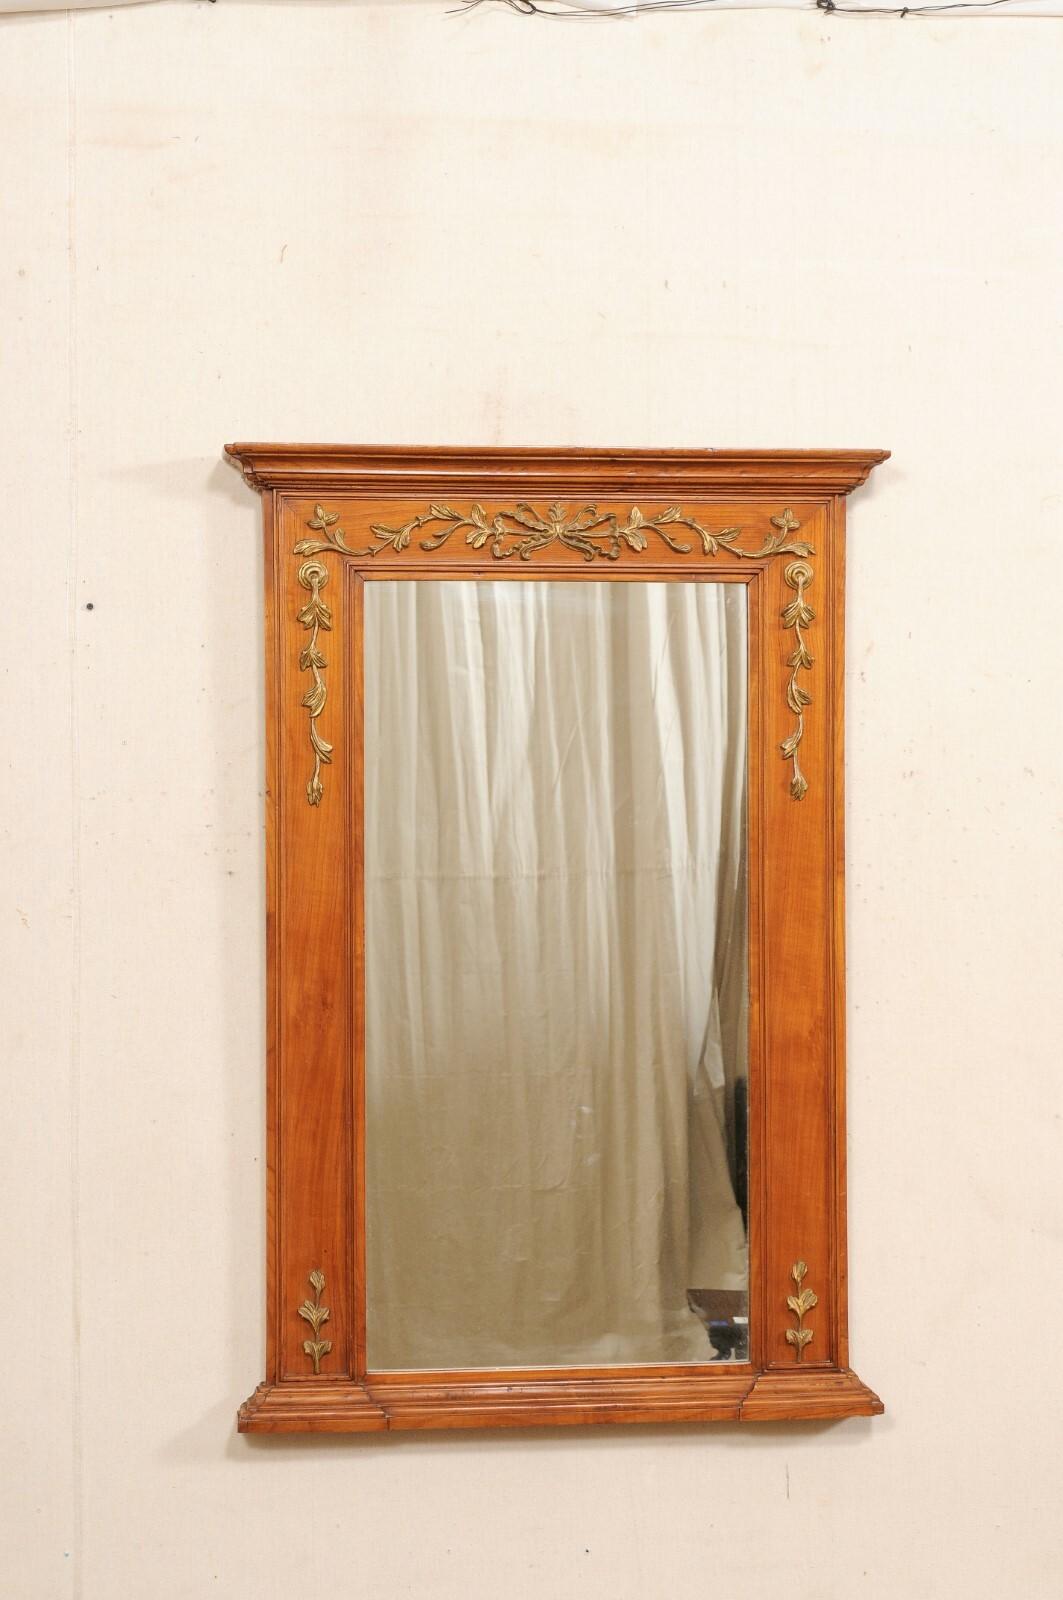 A French over-mantle carved-wood mirror from the early 20th century. This antique mirror from France stands approximately 4 feet in height. It is rectangular in shape with a nicely molded top cornice, and floral garland embellishments with a bow-tie